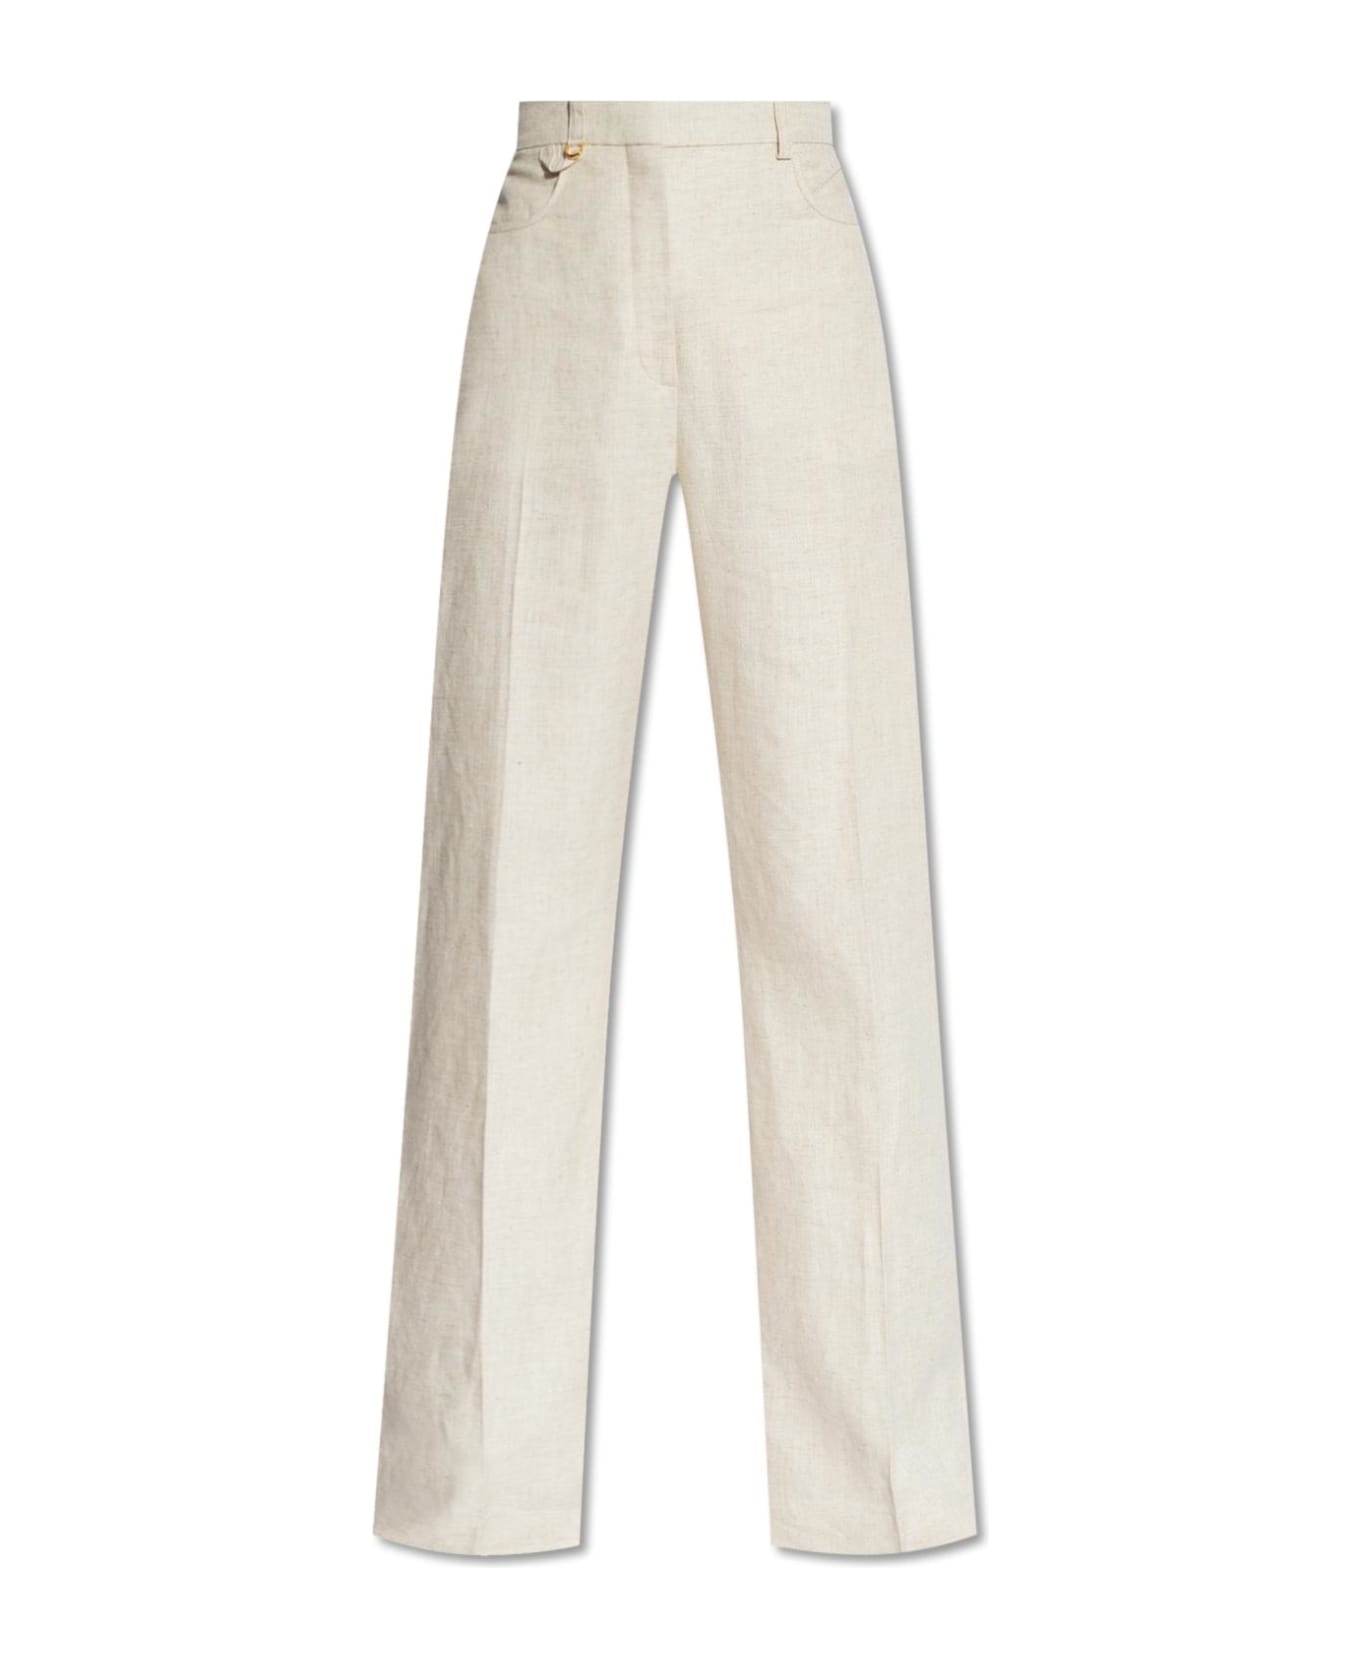 Jacquemus Sauge Viscose And Linen Trousers - Light beige ボトムス